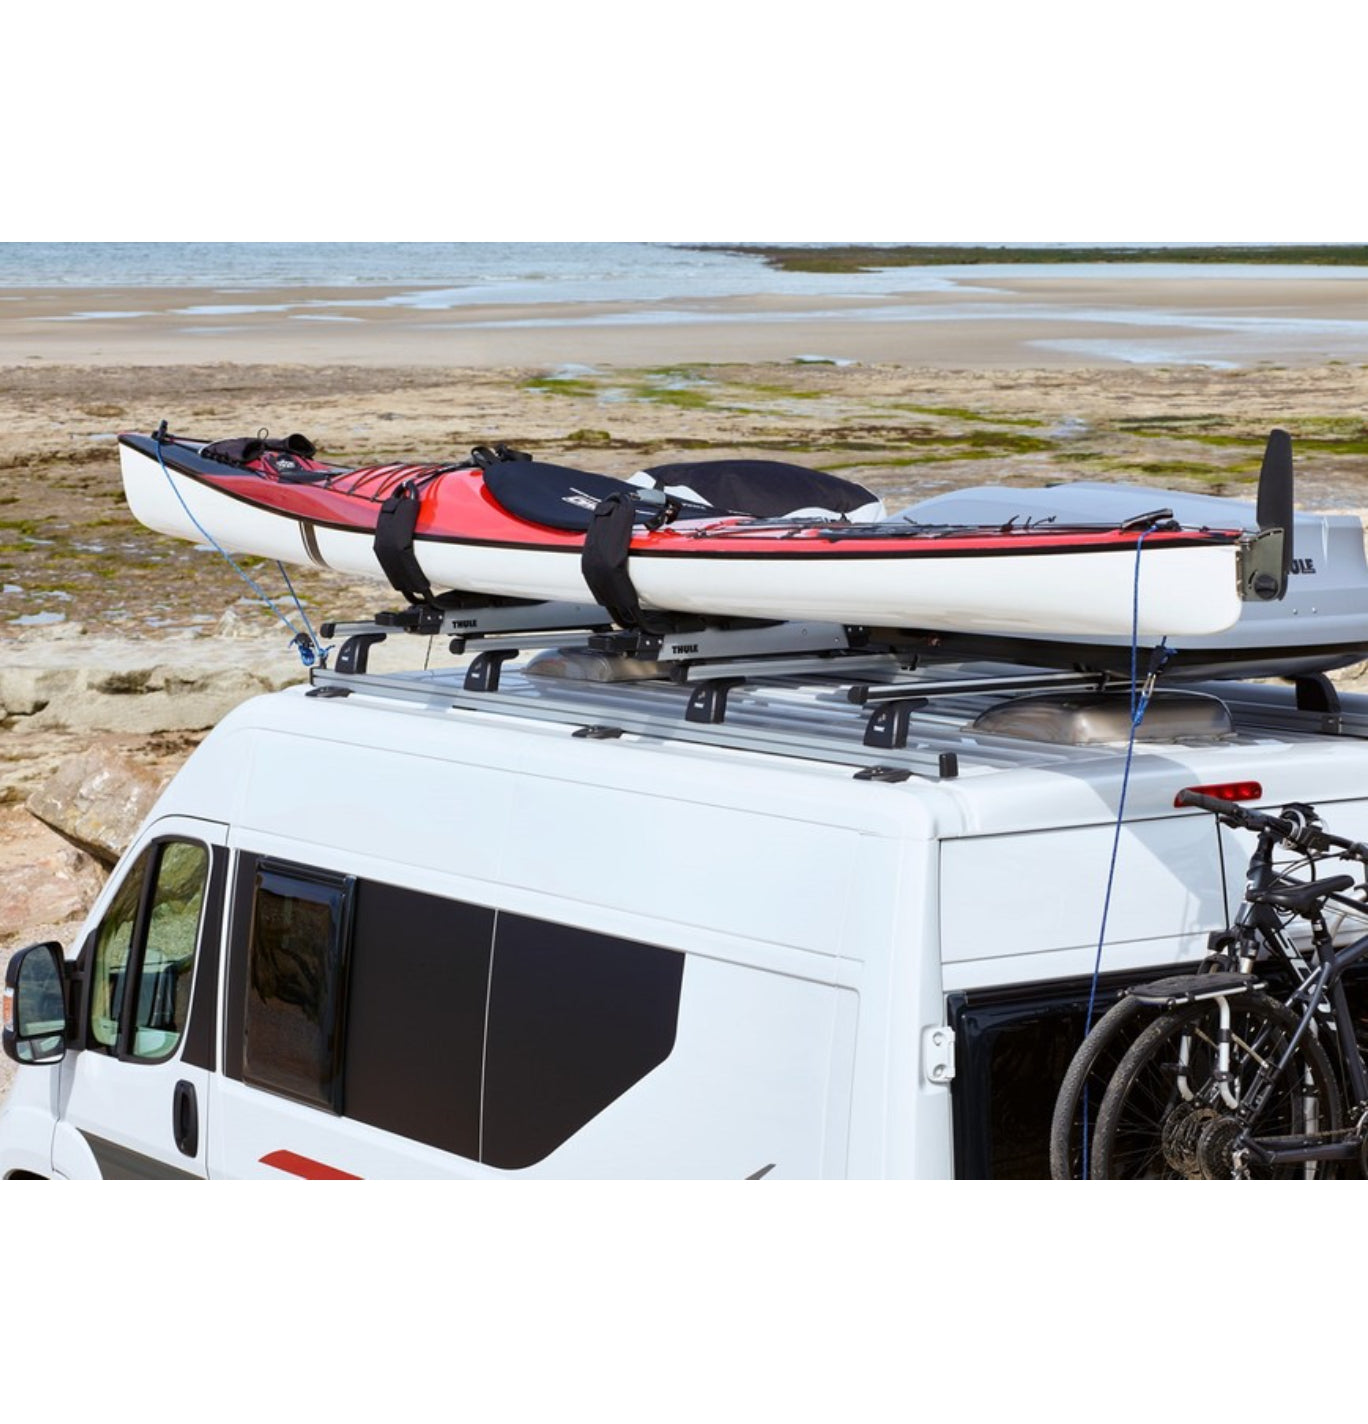 Thule SmartClamp Roof Rack Mounting System